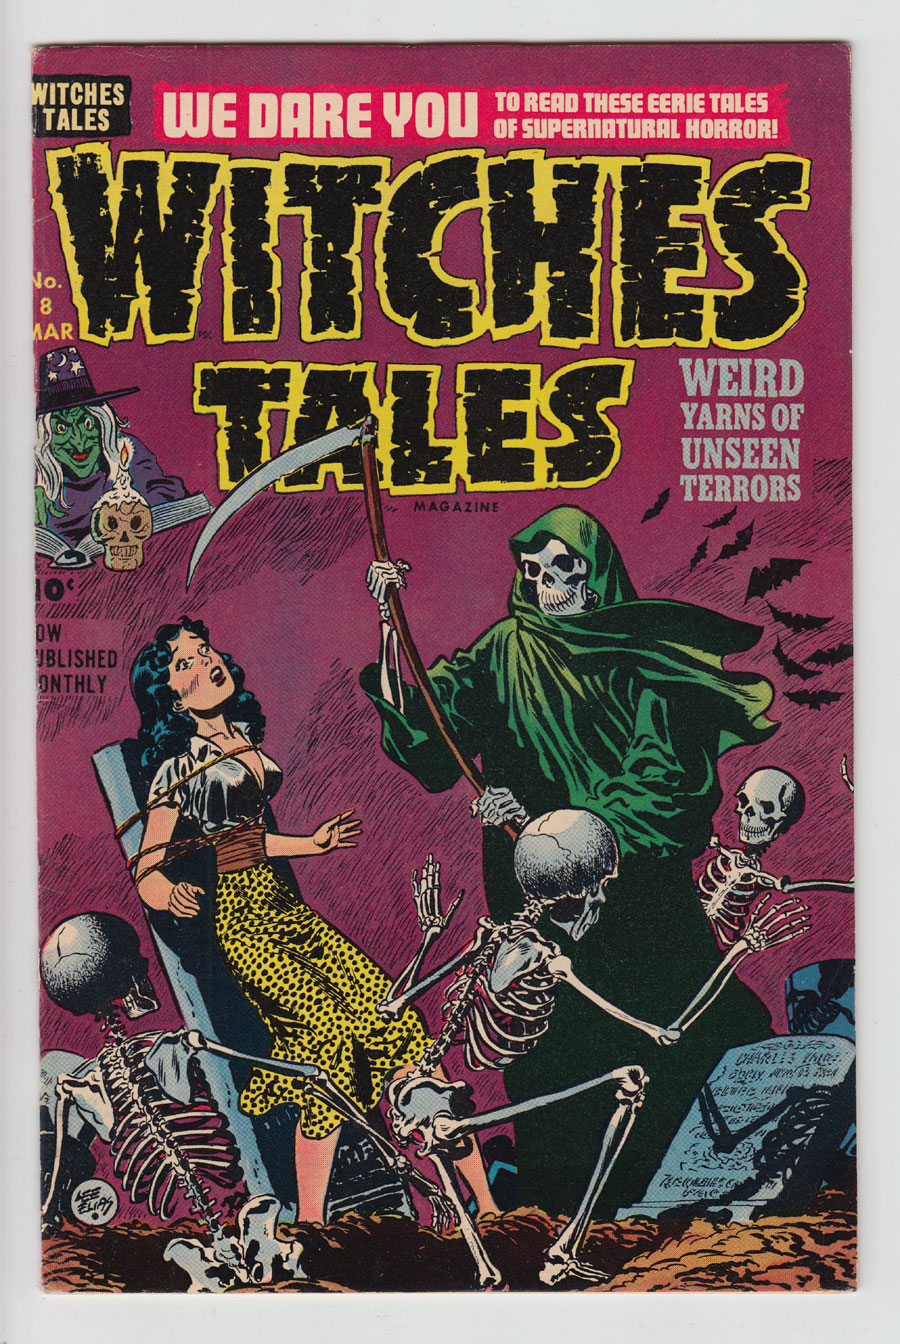 ComicConnect - WITCHES TALES (1951-54) #8 - VF+: 8.5